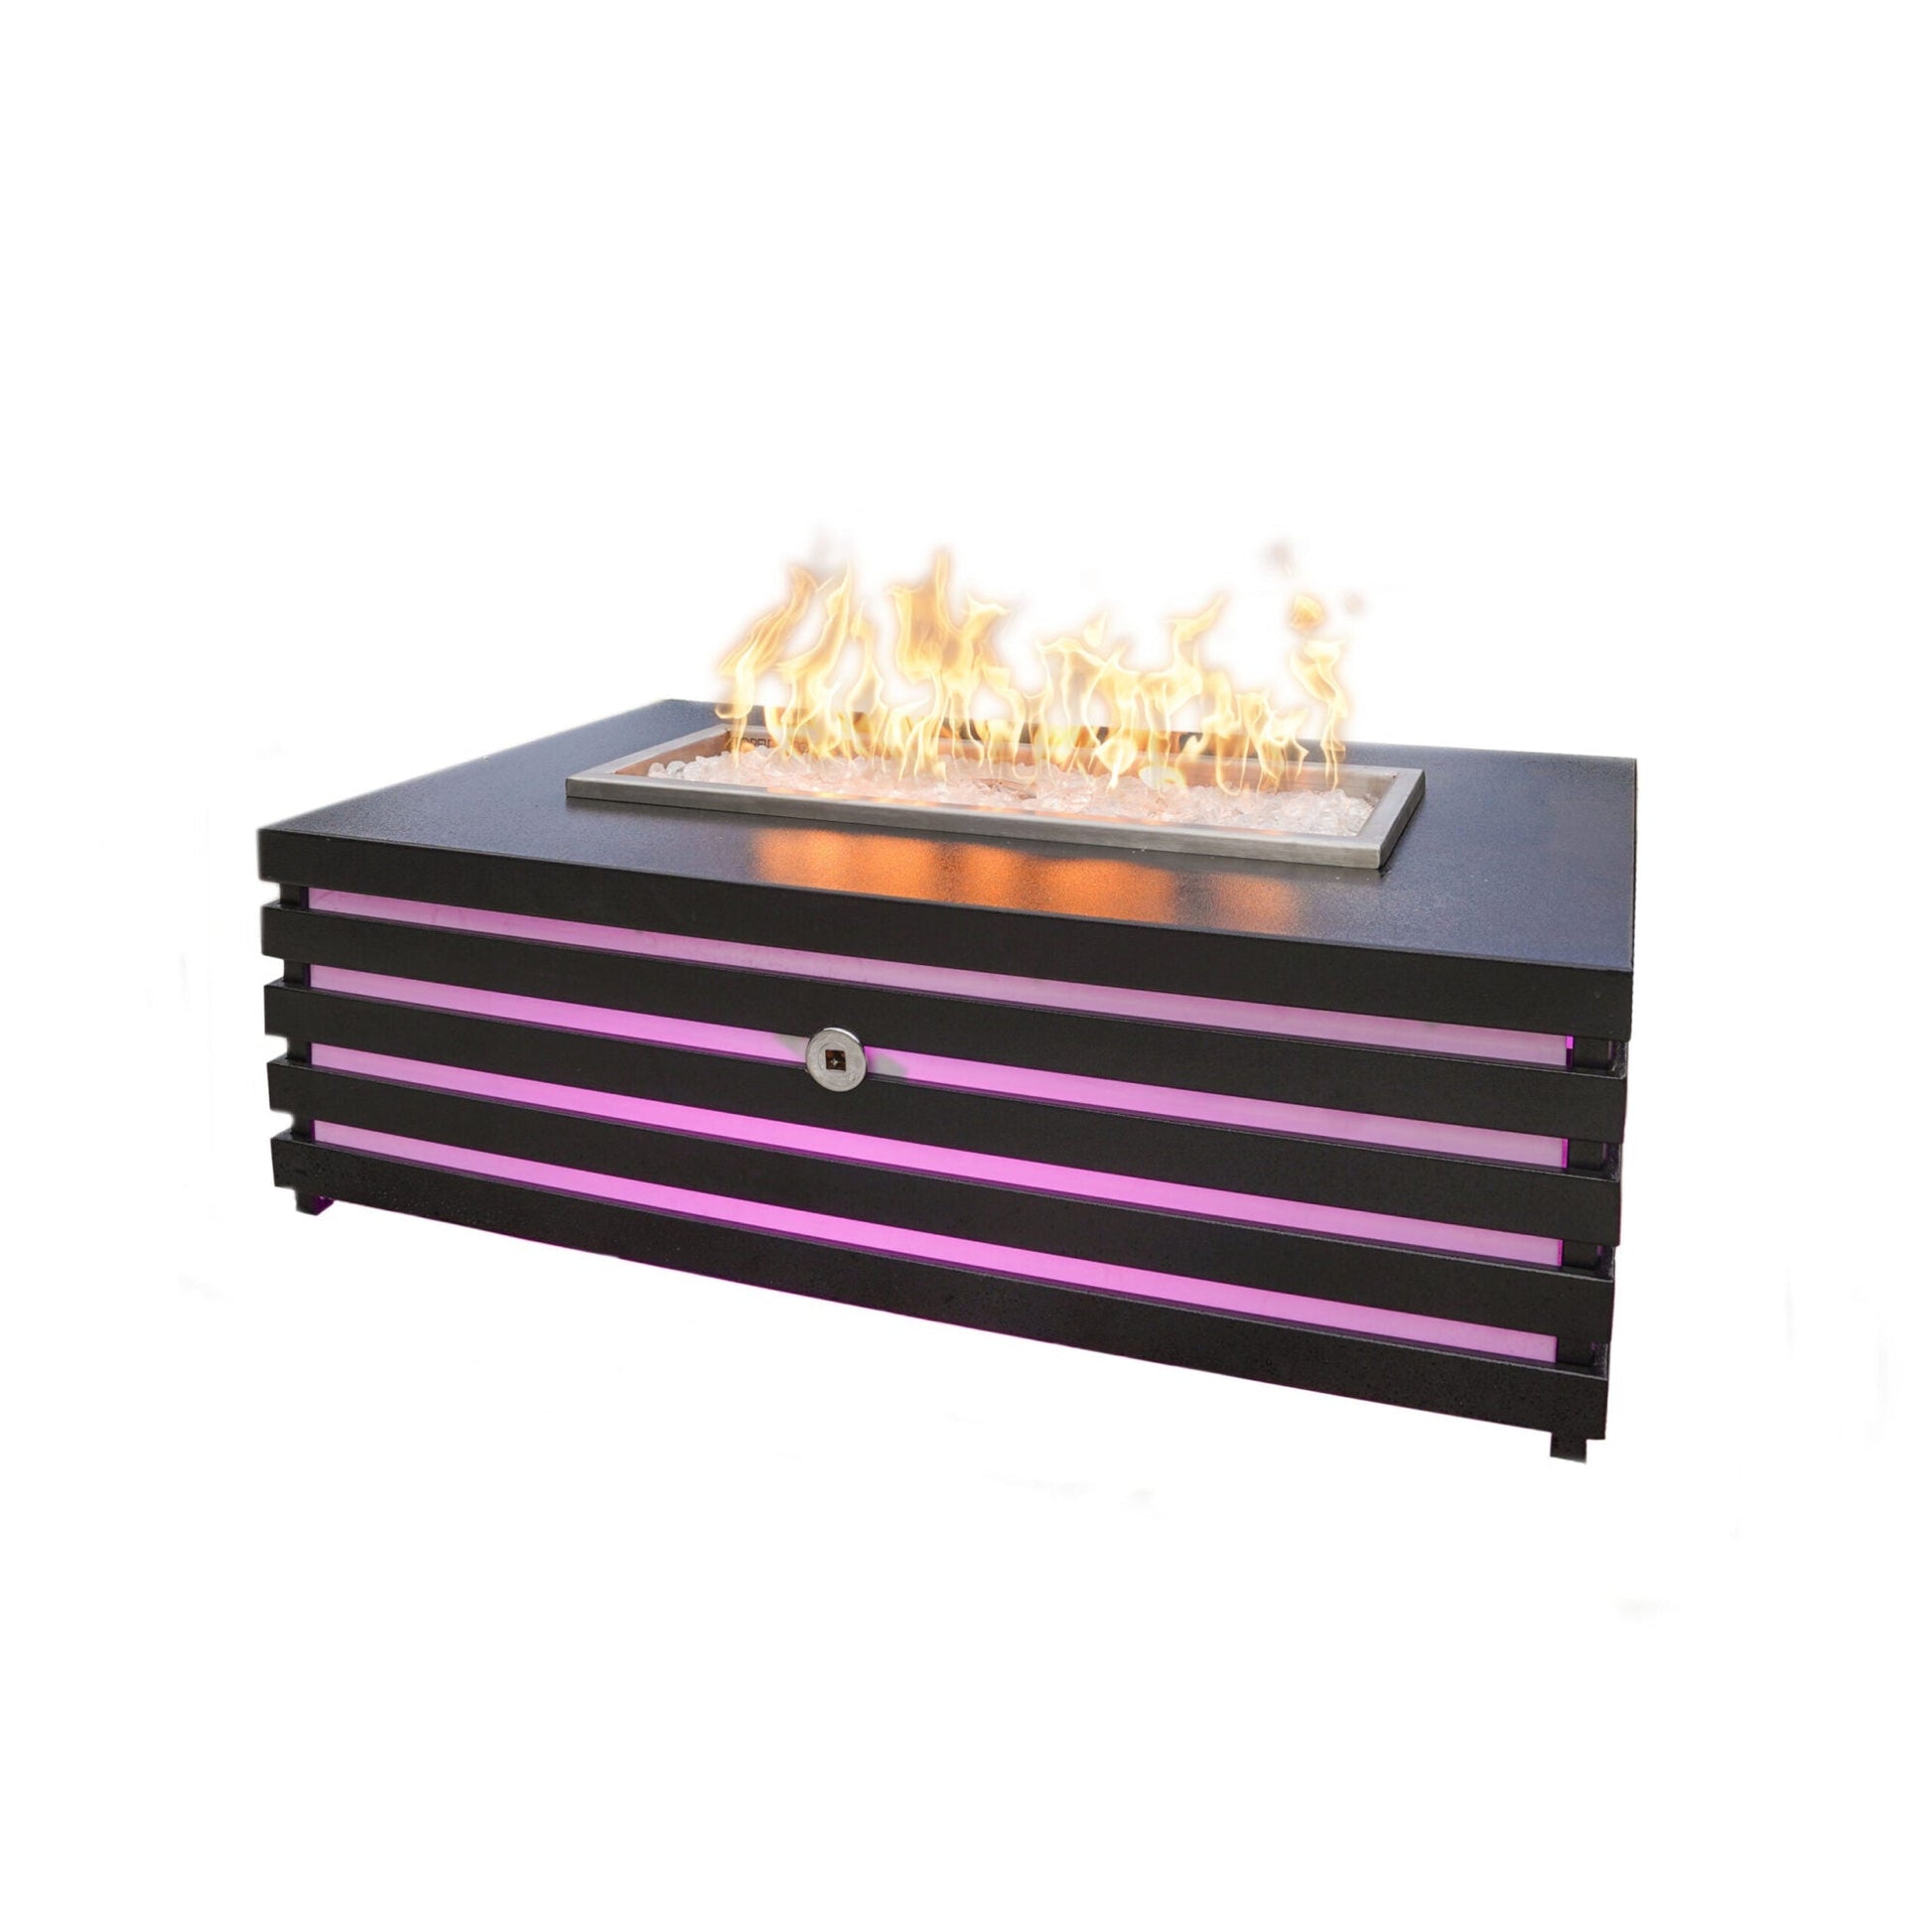 The Outdoor Plus Amina 72" Copper Vein Powder Coated Natural Gas Fire Pit with 12V Electronic Ignition